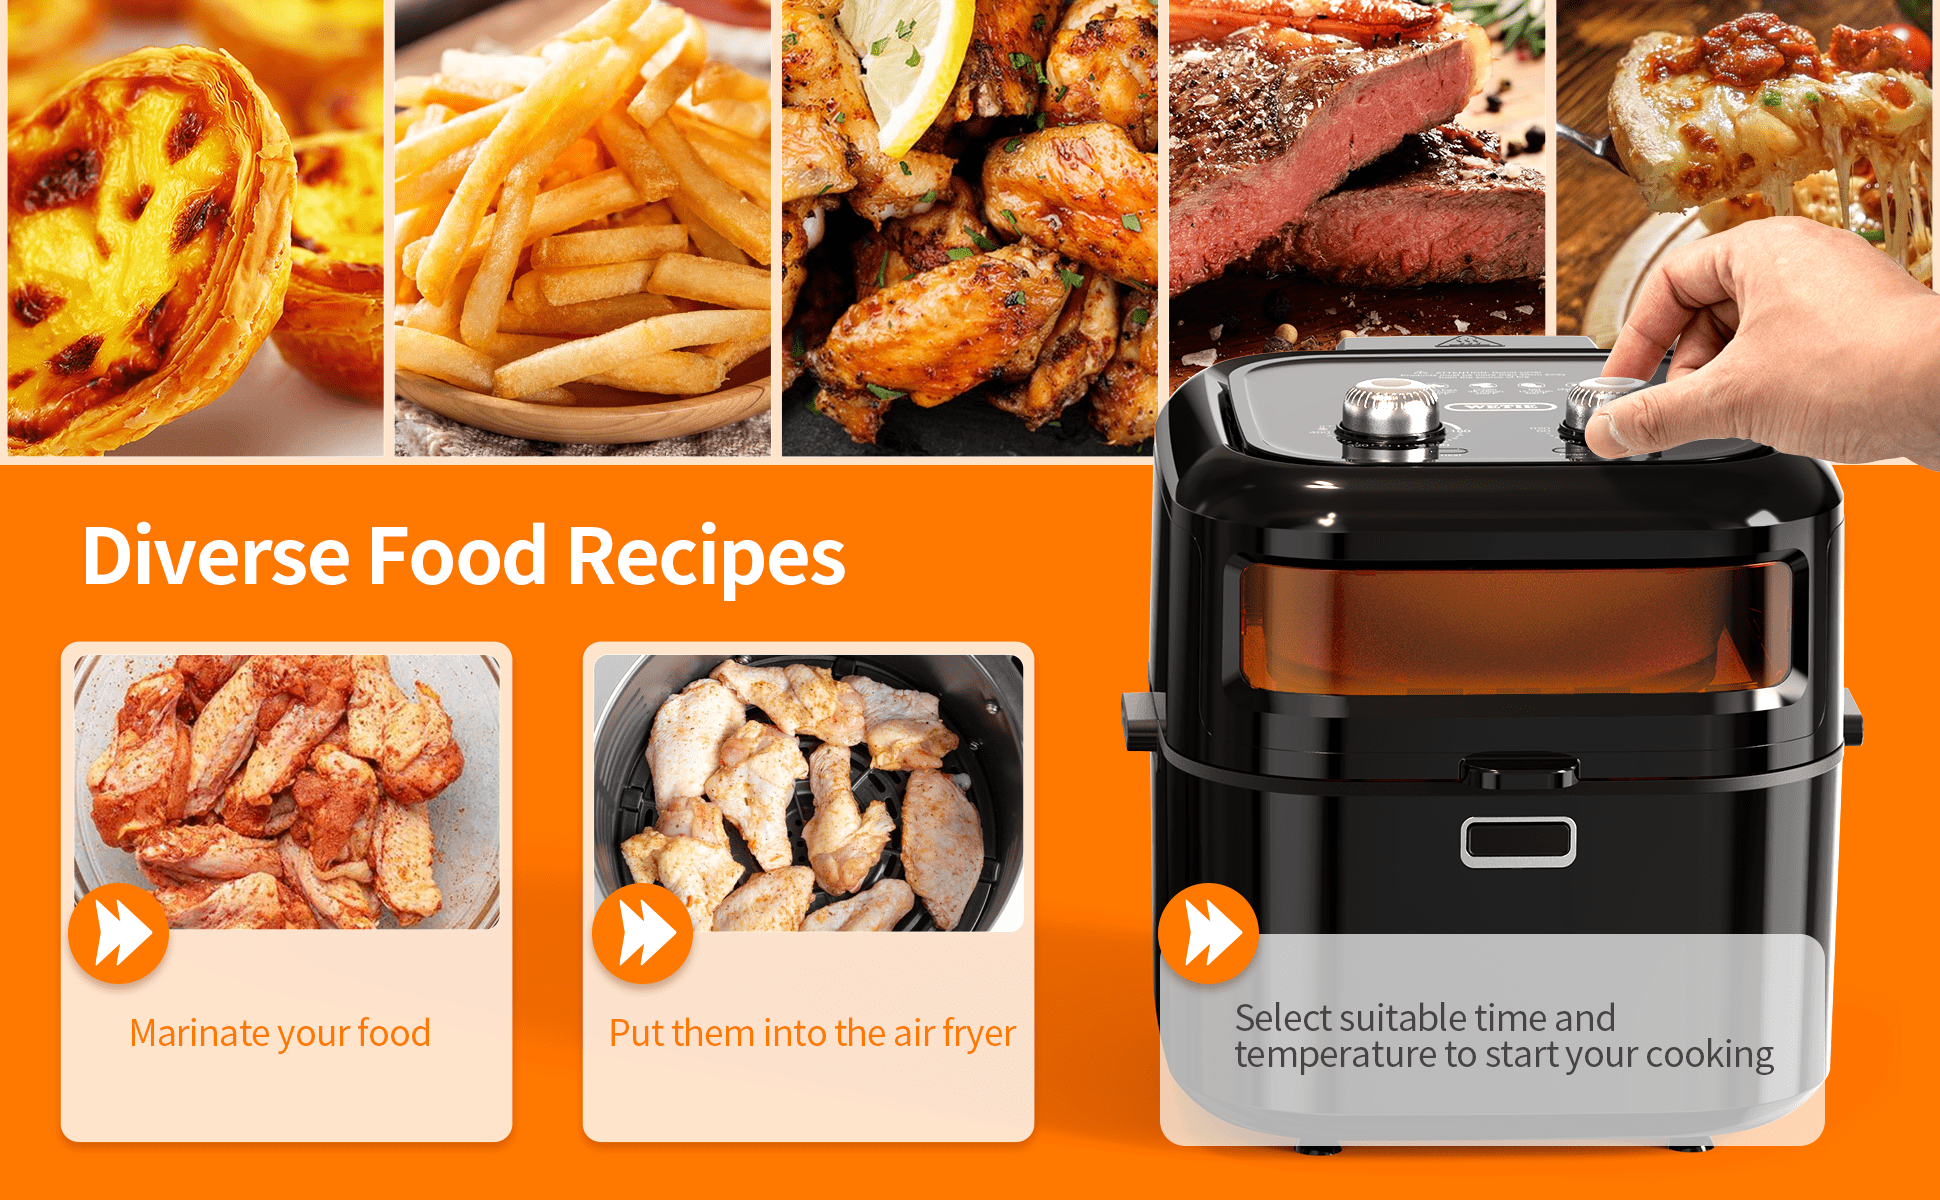 Air Fryer By Utopia Kitchen Product Review by VisualEyeCandy ReviewsJust4U!  